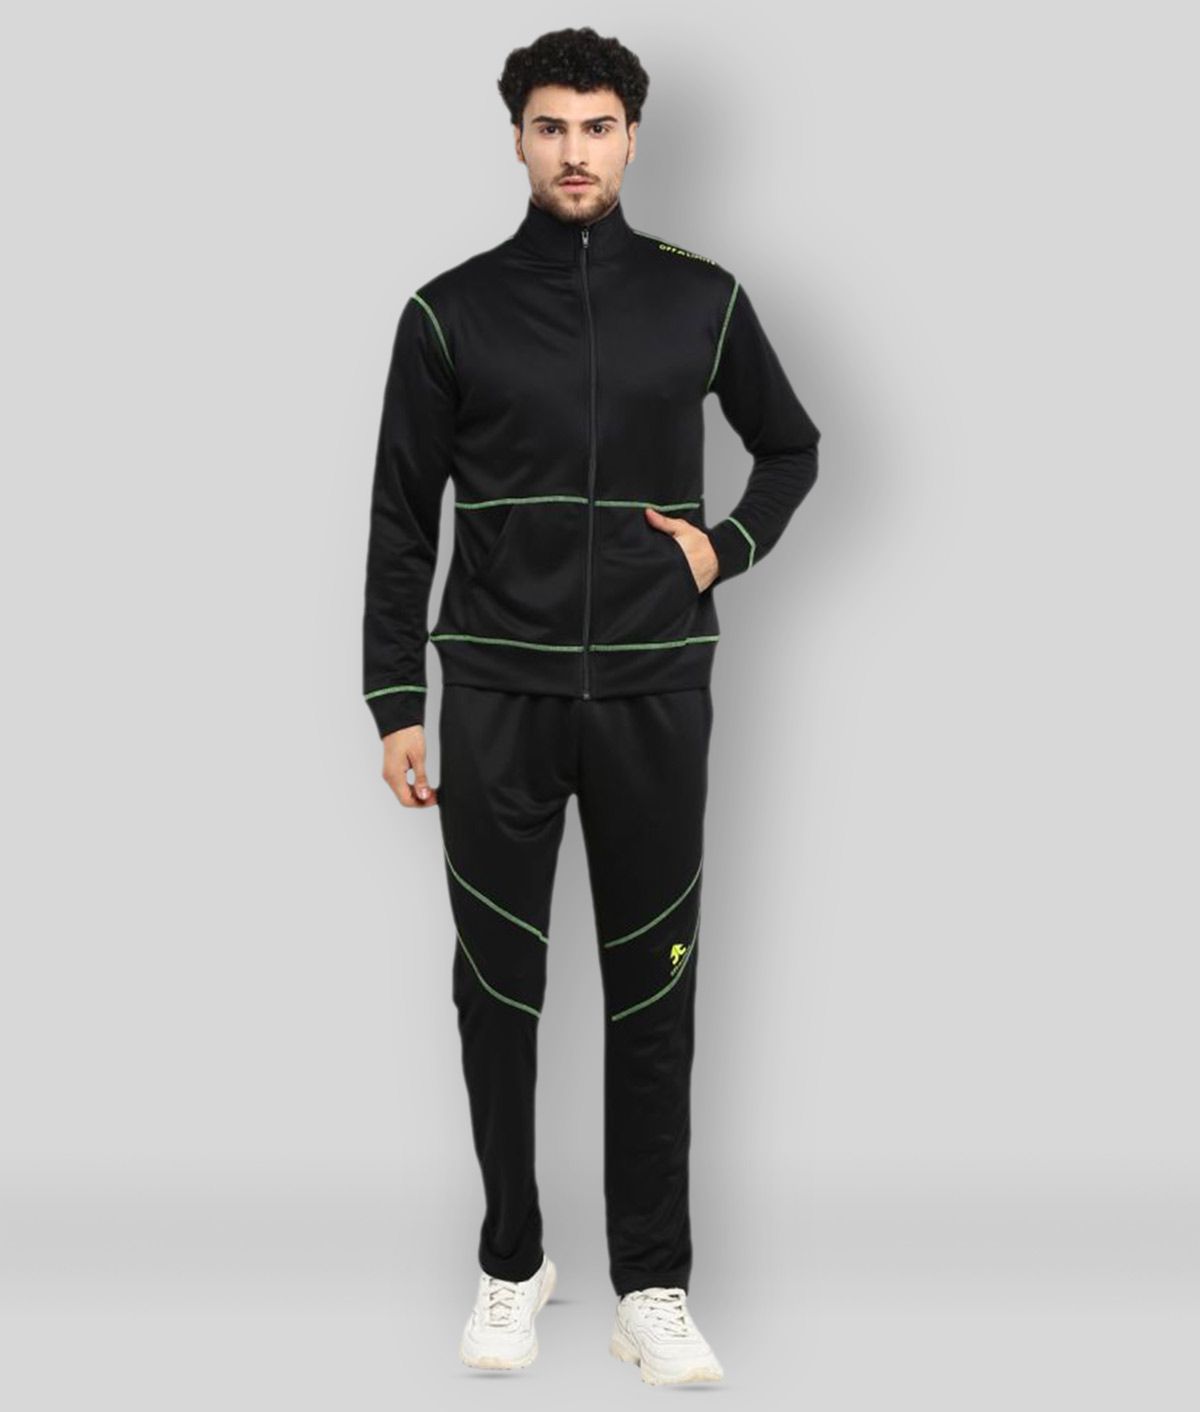 OFF LIMITS - Black Polyester Regular Fit Solid Men's Sports Tracksuit ( Pack of 1 )